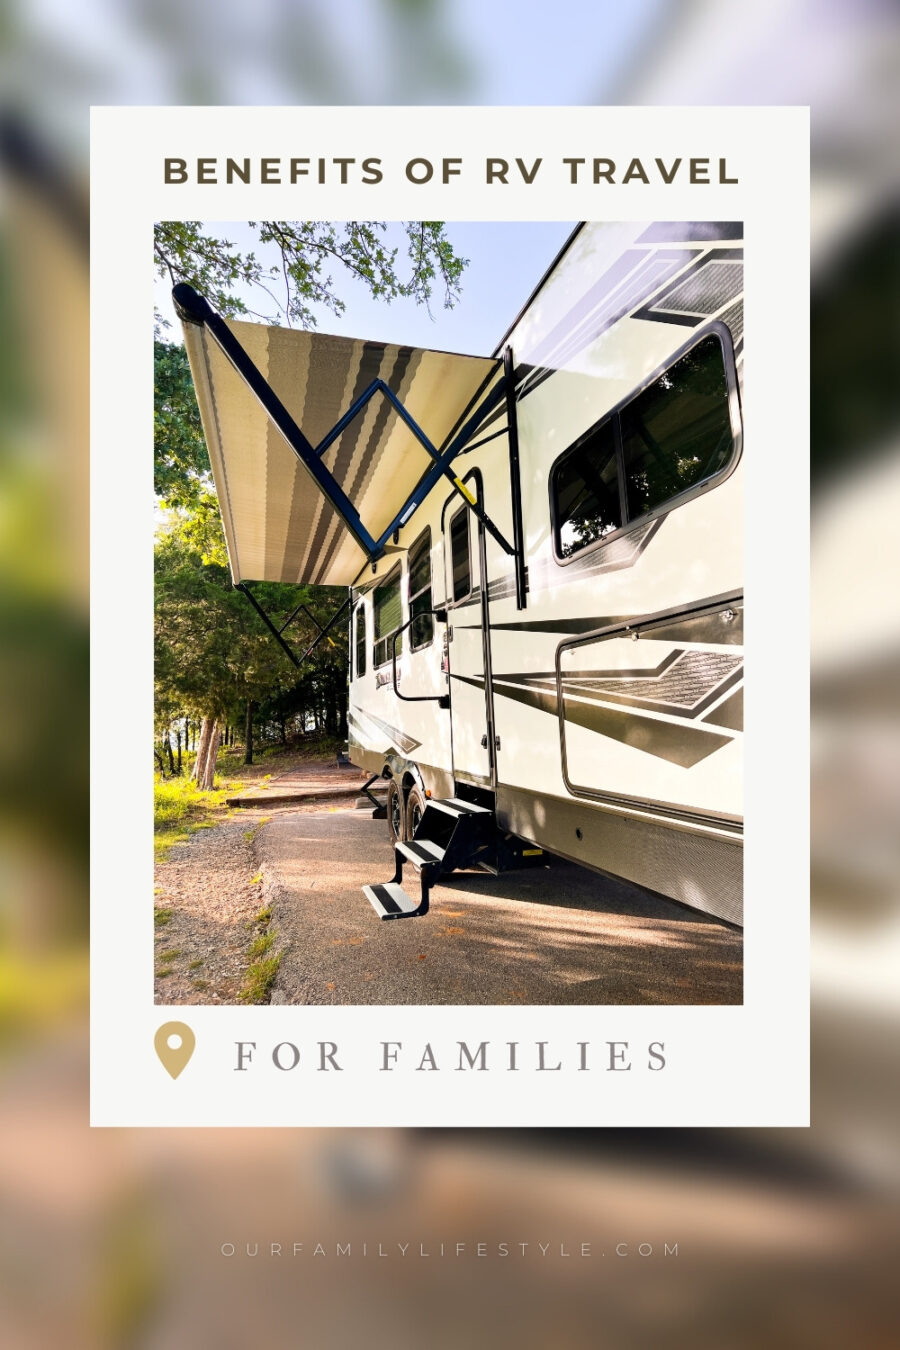 Benefits of RV Travel for Families